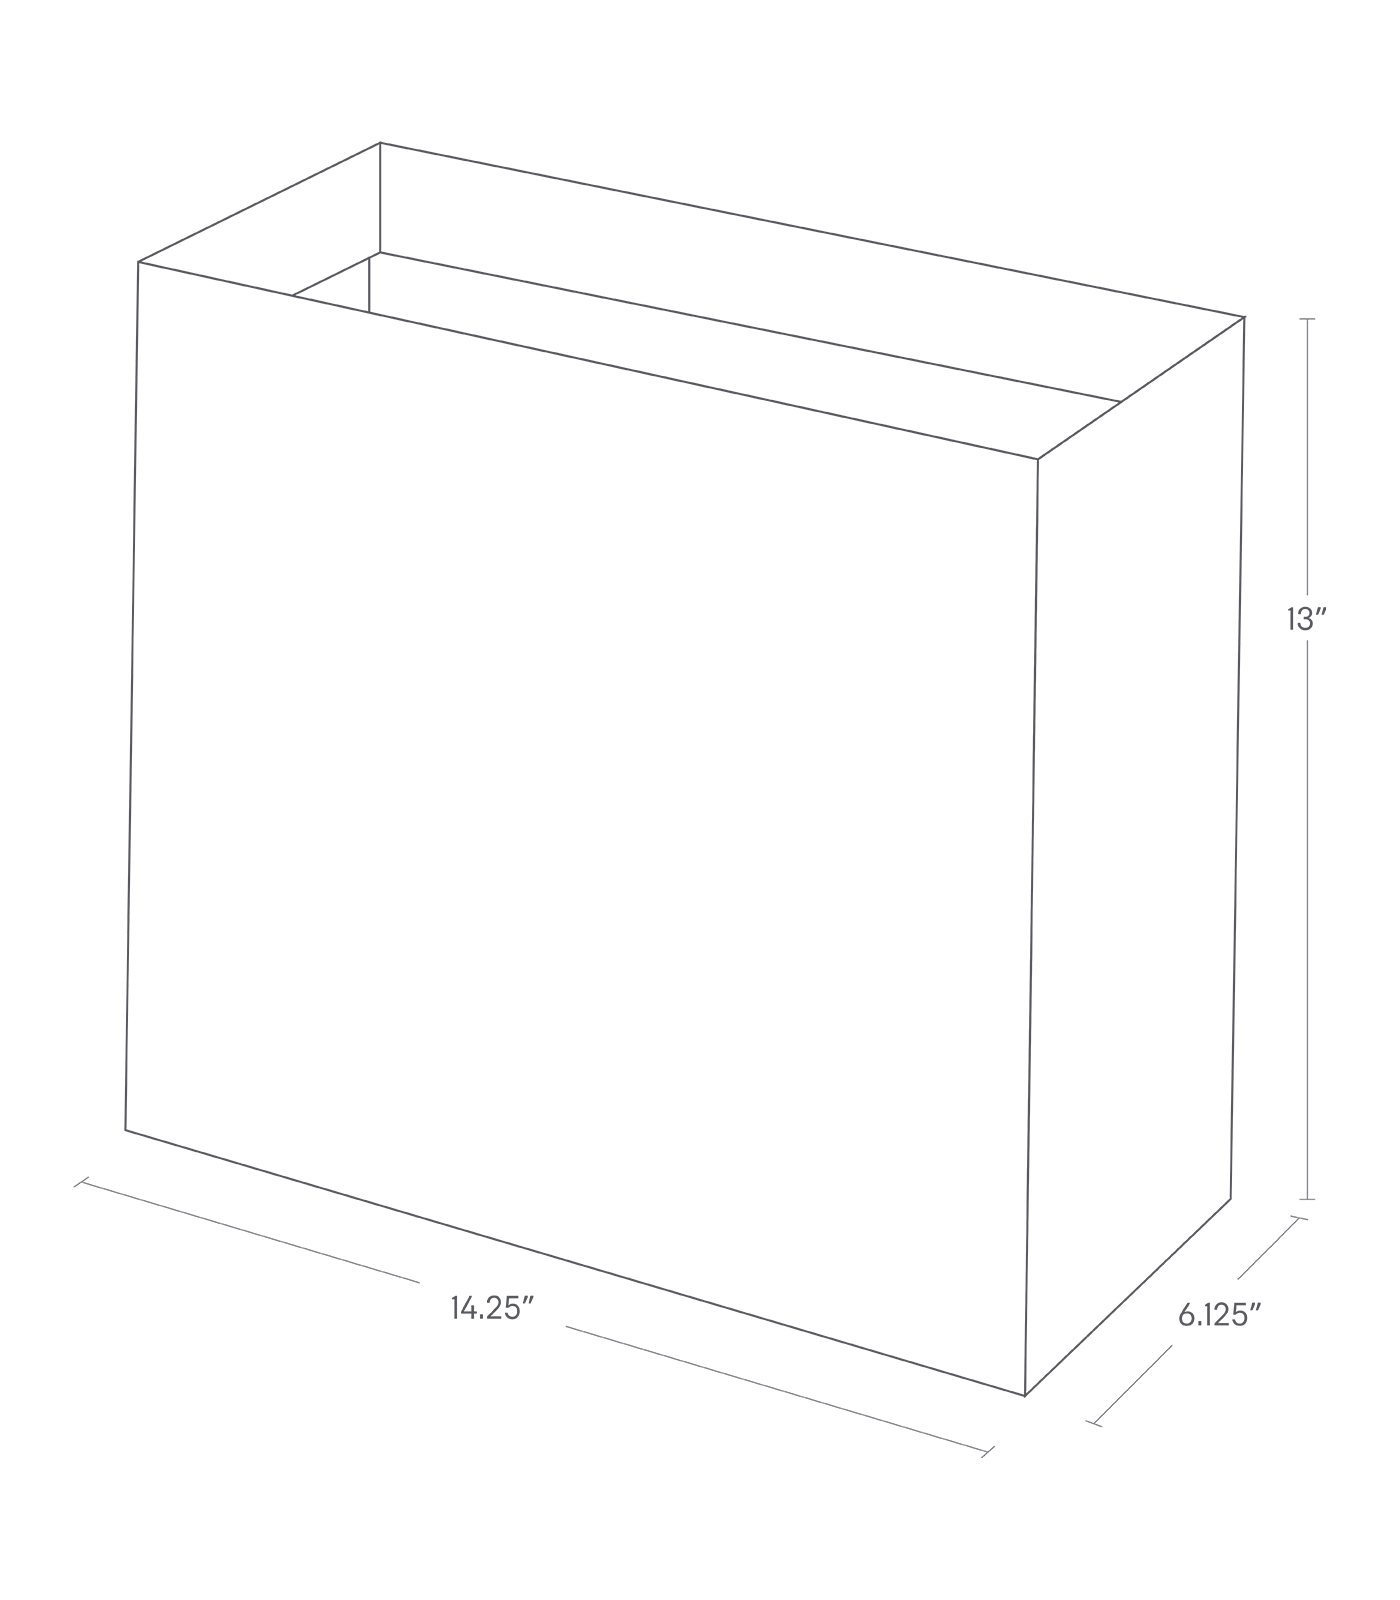 Dimension image for Trash Can showing length of 14.25